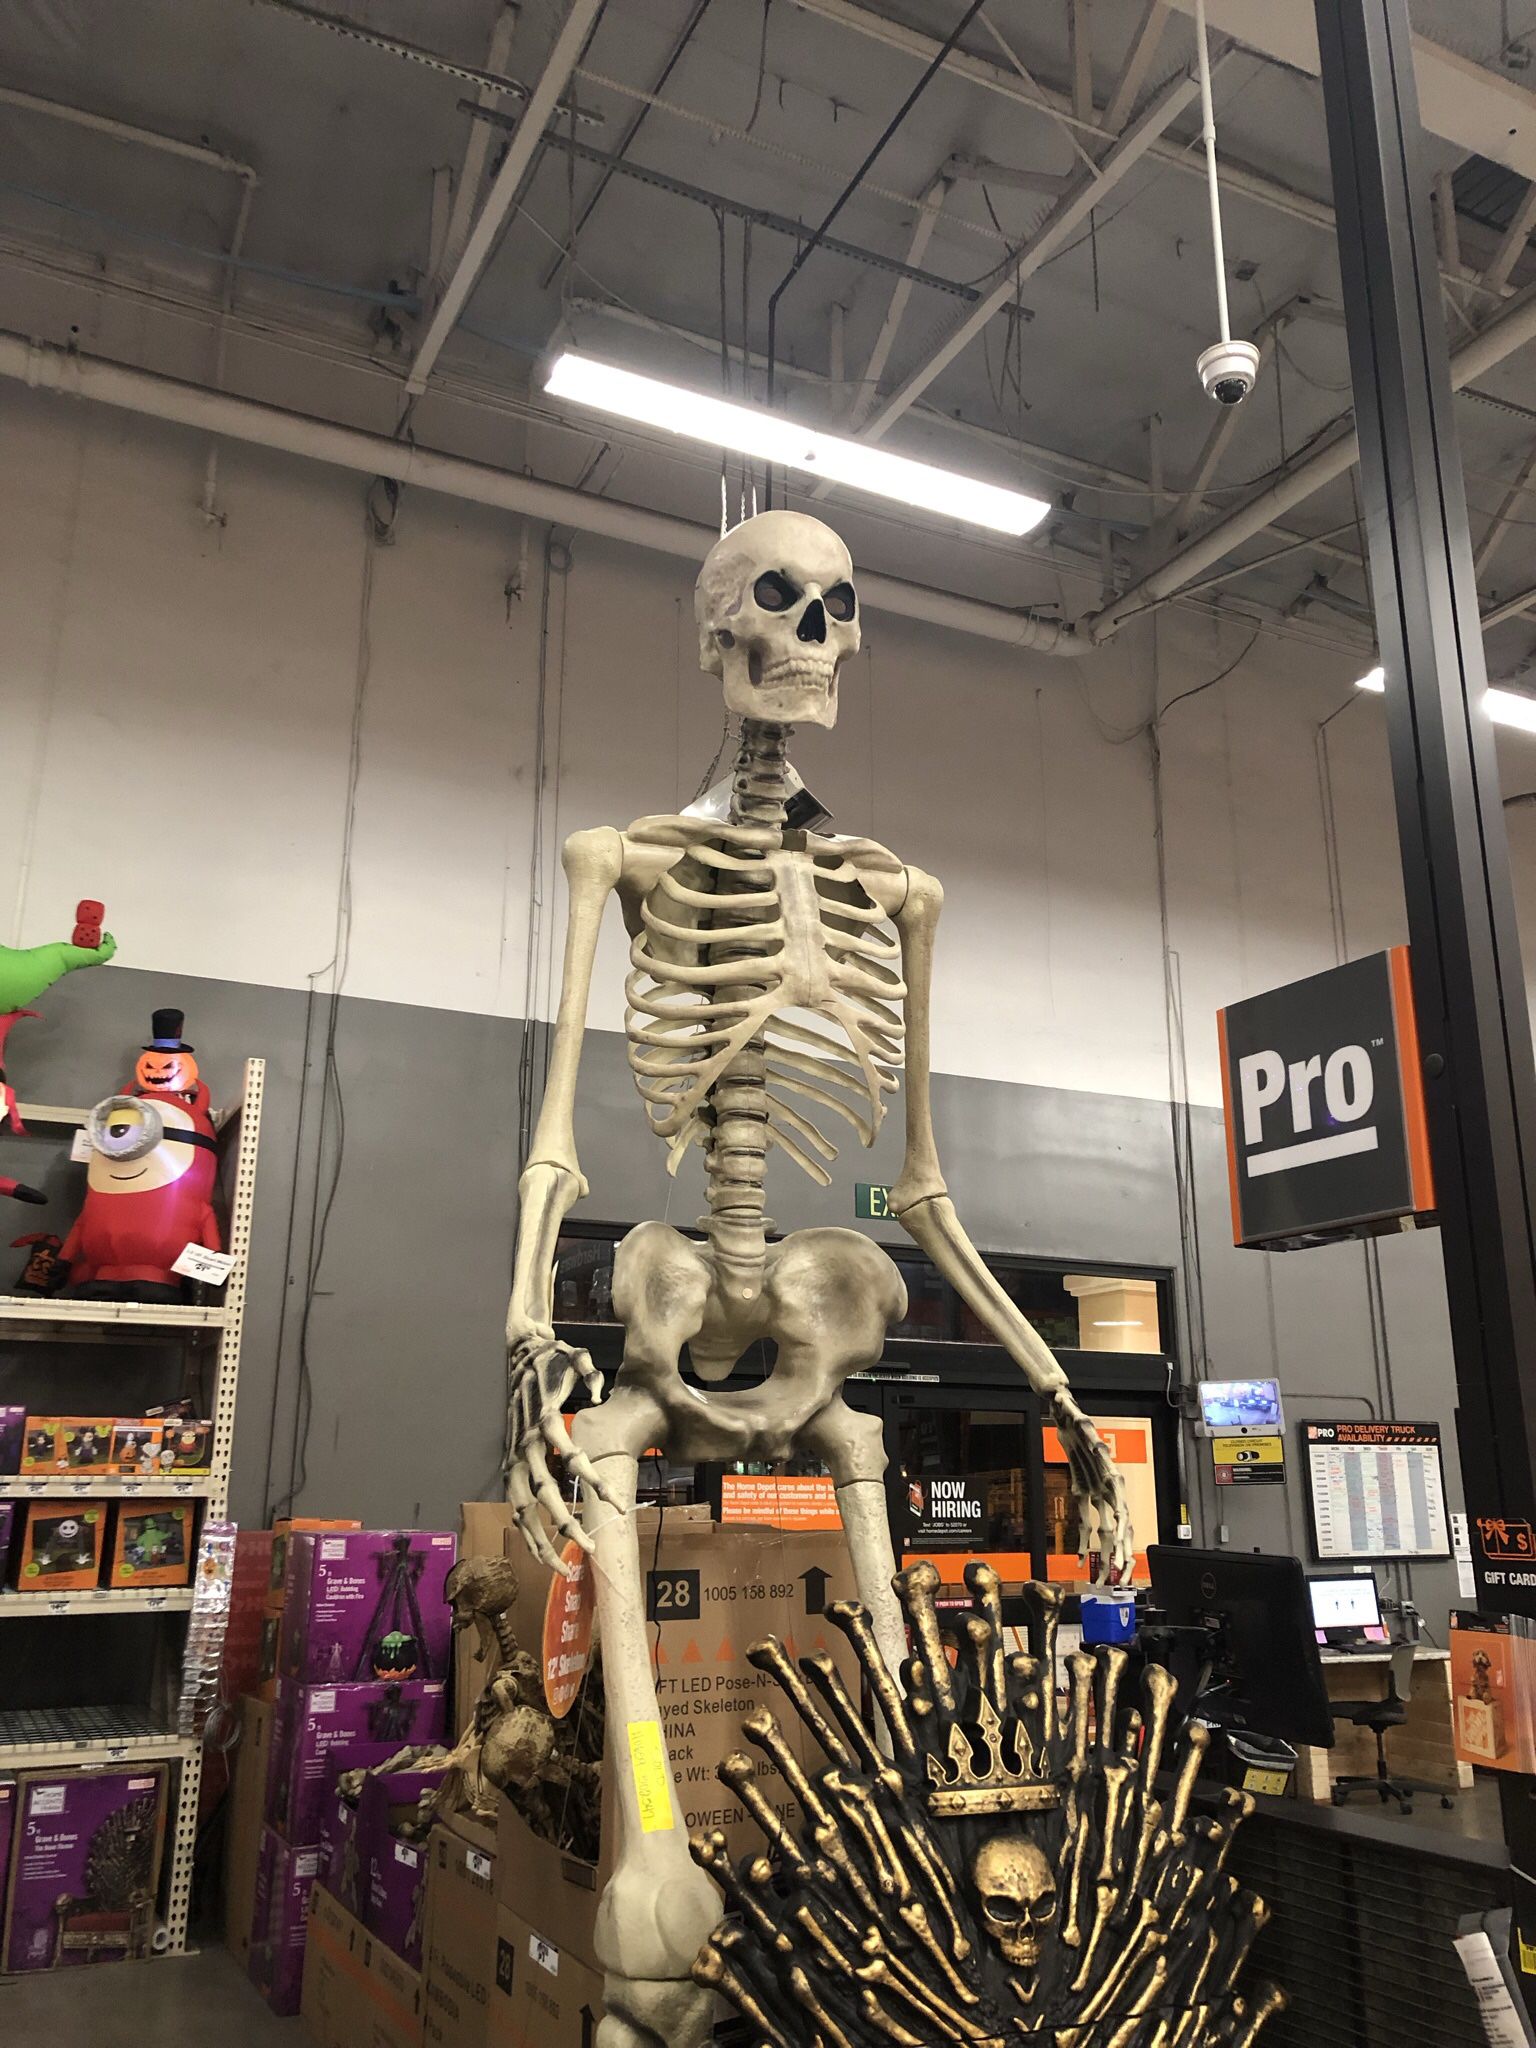 Holloween 12 Foot Tall Skeleton Brand New In Box.